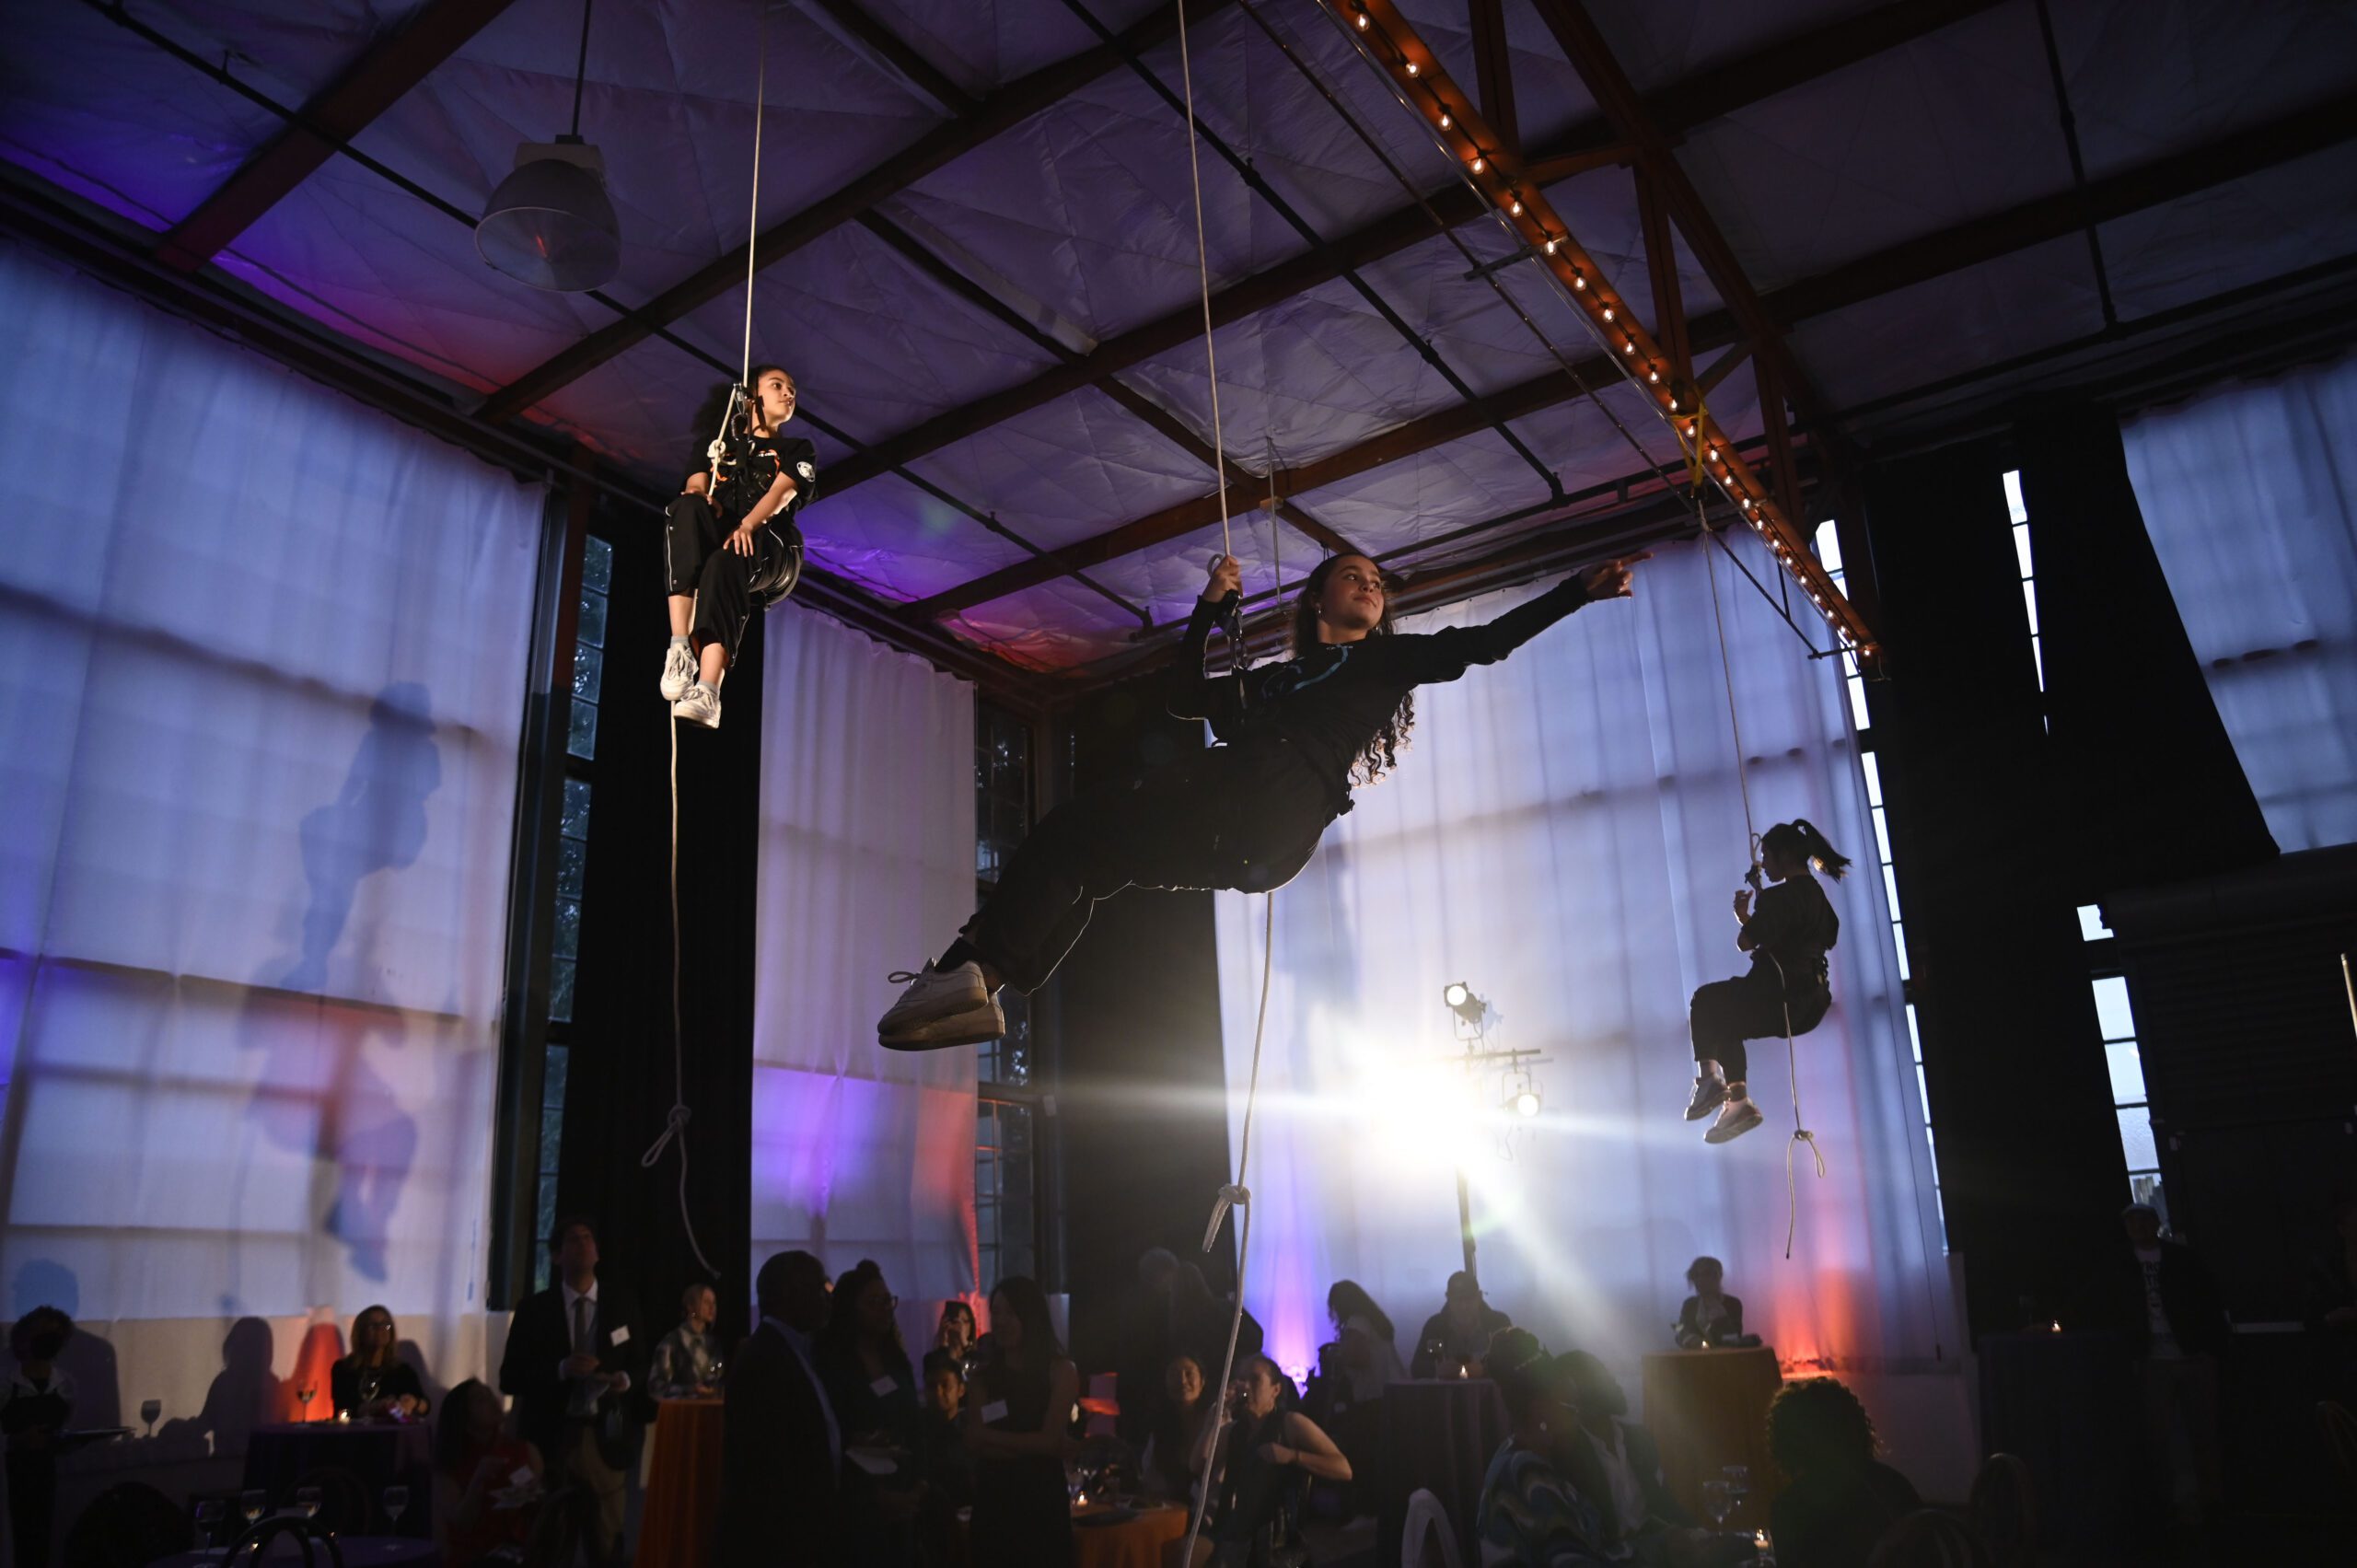 A creative space in Berkeley hosting a live acrobatic event where three people are suspended from the cieling.